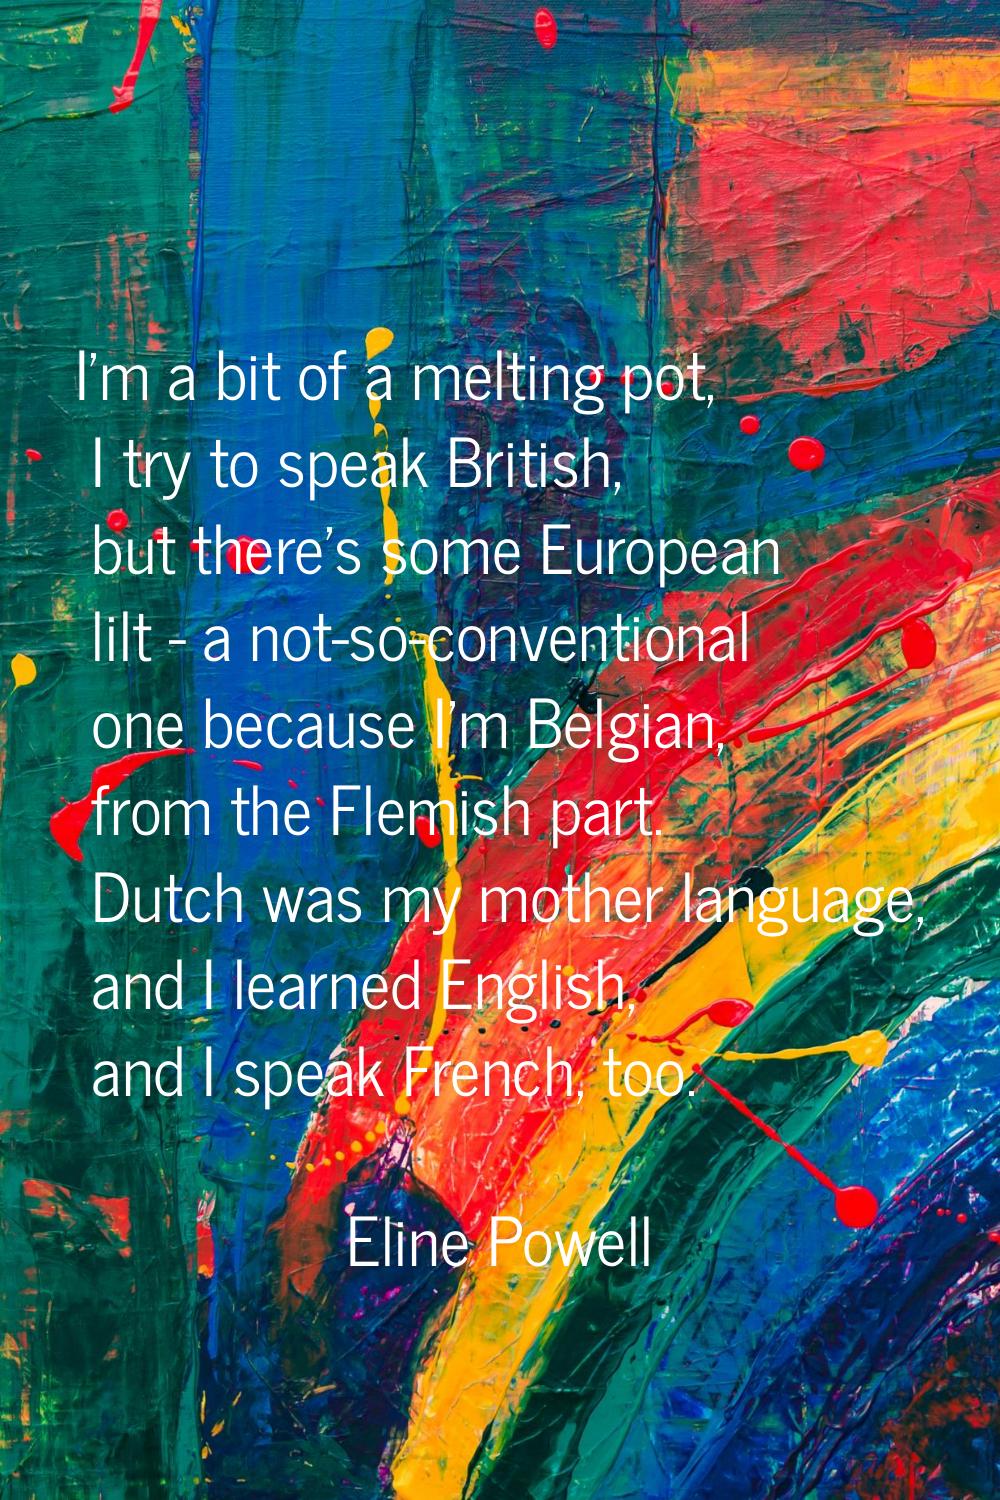 I'm a bit of a melting pot, I try to speak British, but there's some European lilt - a not-so-conve